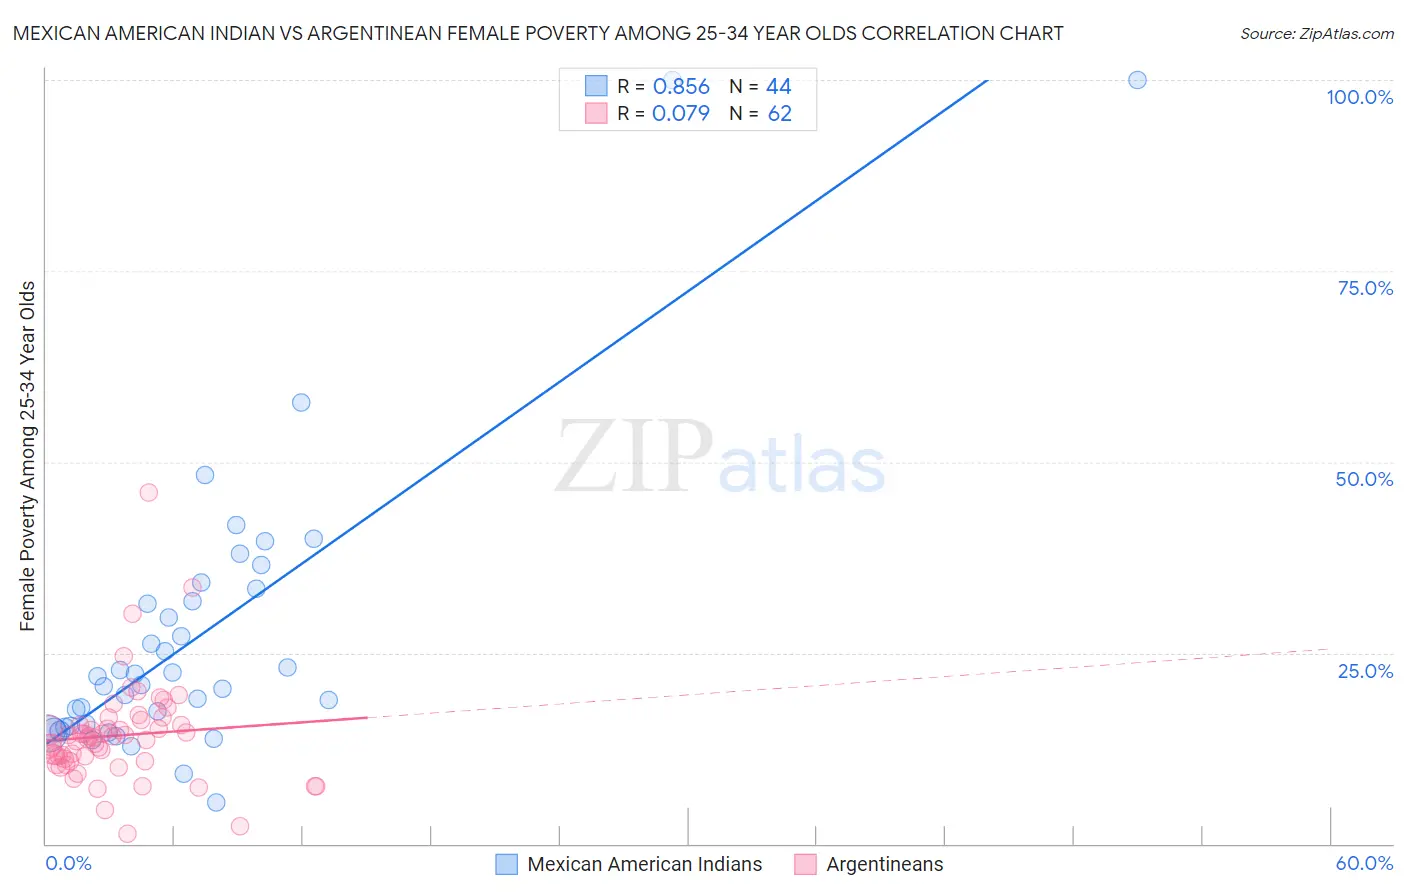 Mexican American Indian vs Argentinean Female Poverty Among 25-34 Year Olds